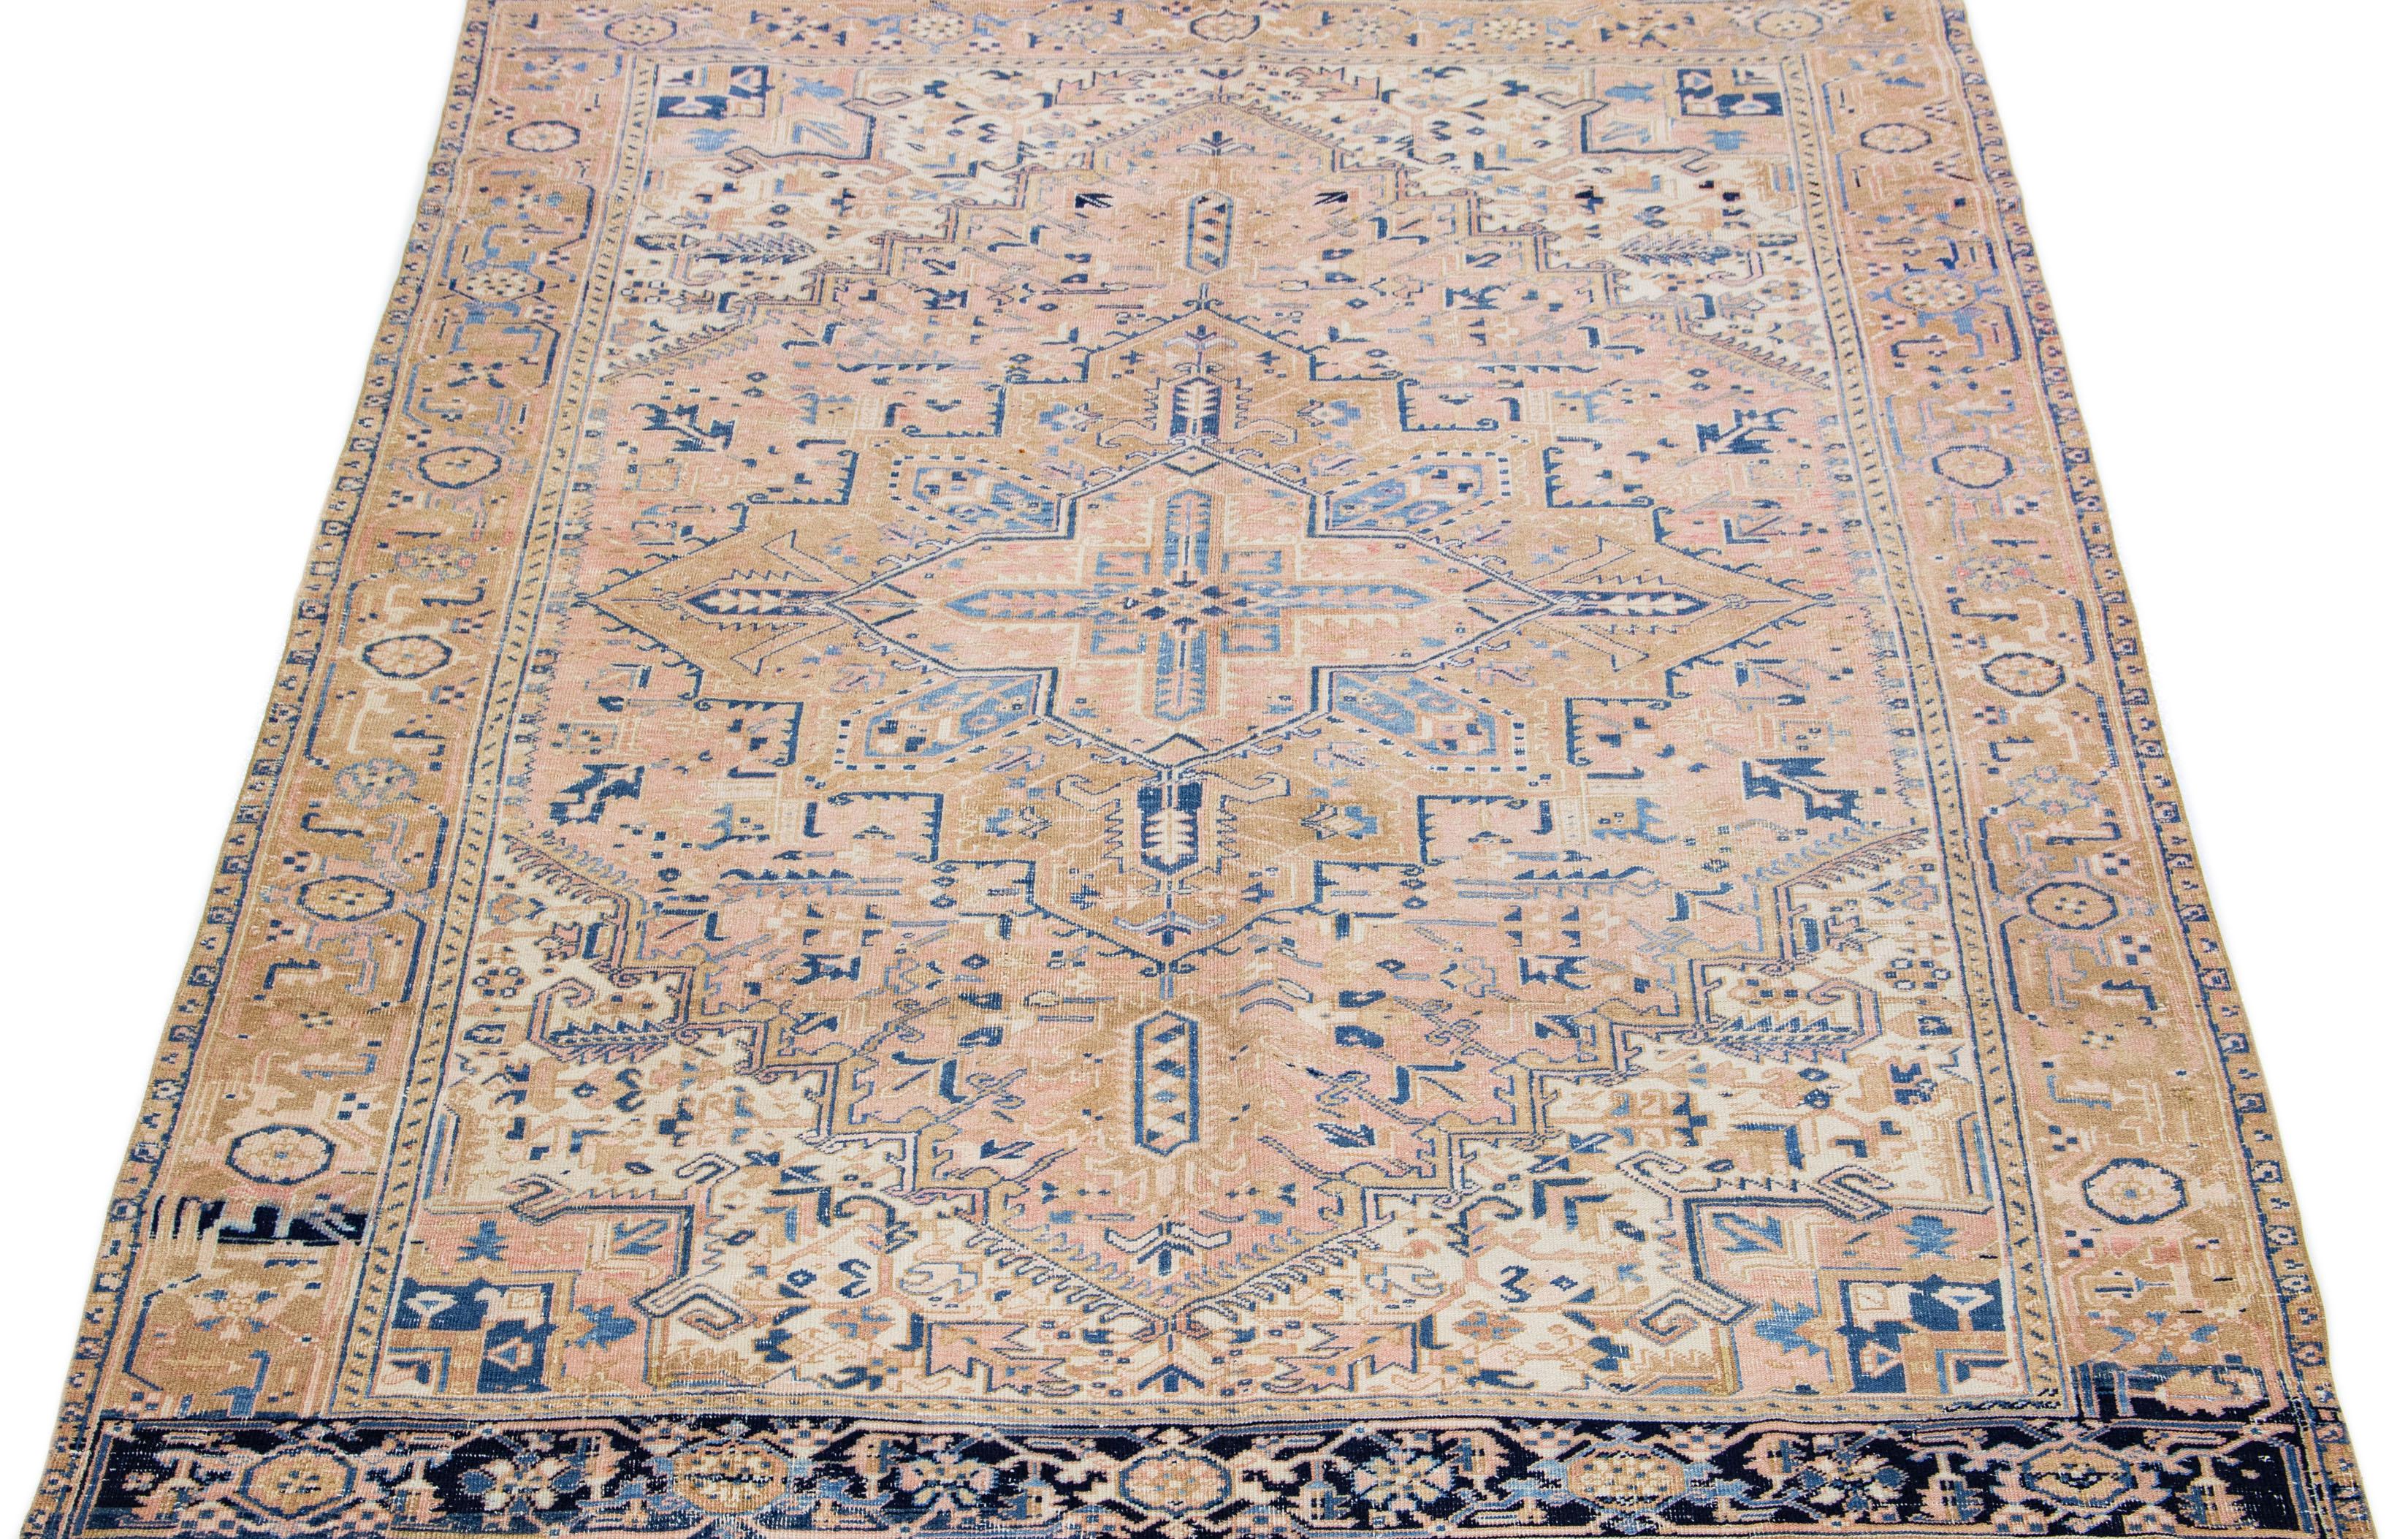 This Persian rug showcases a stunning all-over layout geometric medallion floral motif in shades of blue and beige, set against a peach and brown field. Crafted from luxurious hand-knotted wool, this antique Heriz rug exudes timeless